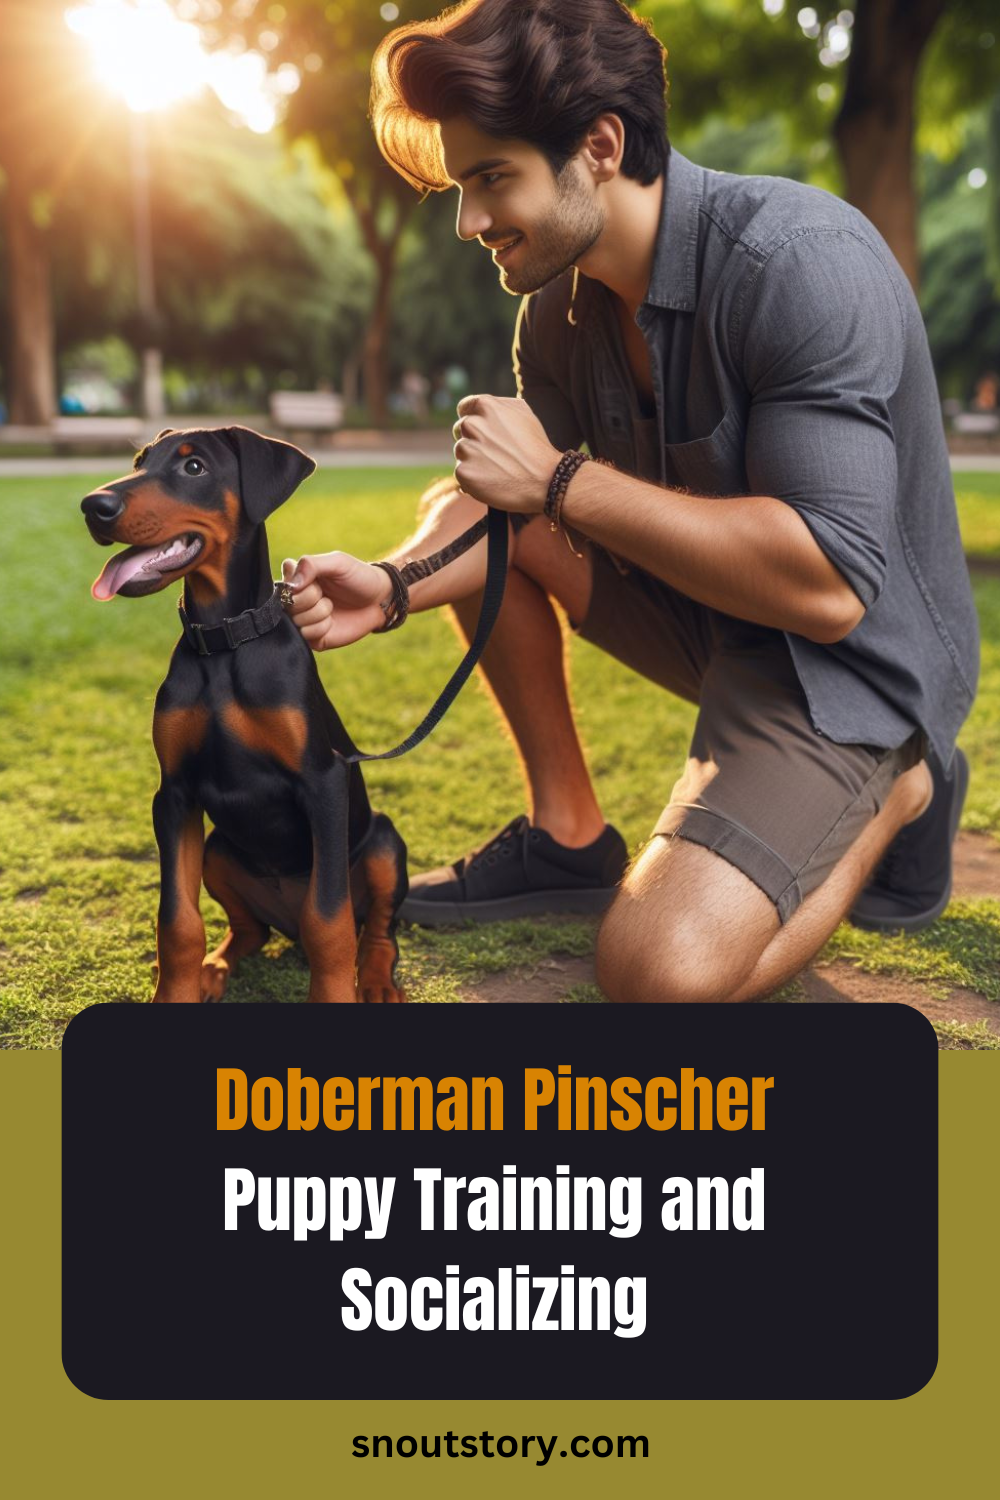 Doberman Pinscher Puppy Training and Socializing (A Complete Guide)